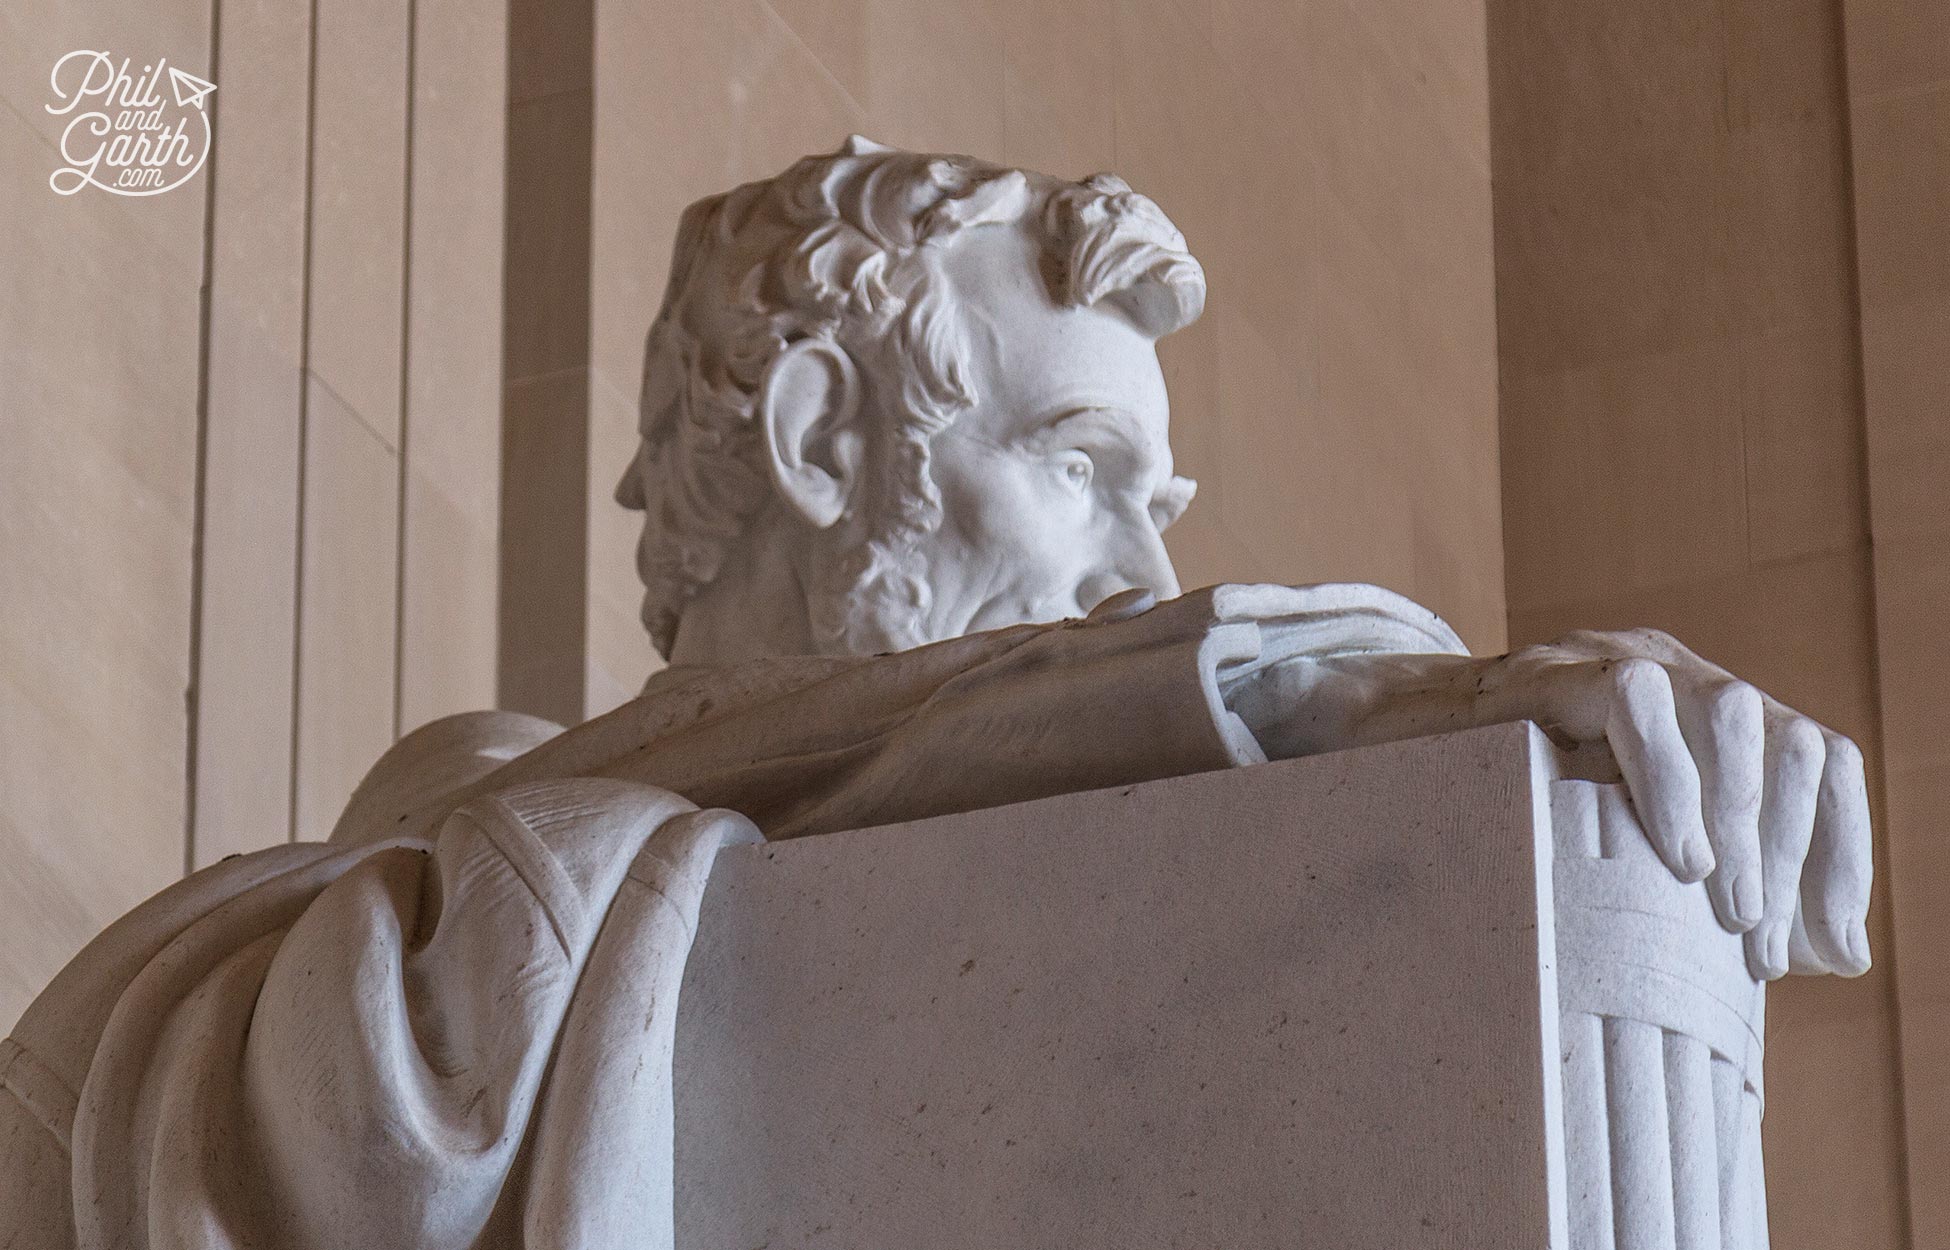 Can you spot the hidden face of army General Robert E Lee on the Lincoln Memorial?